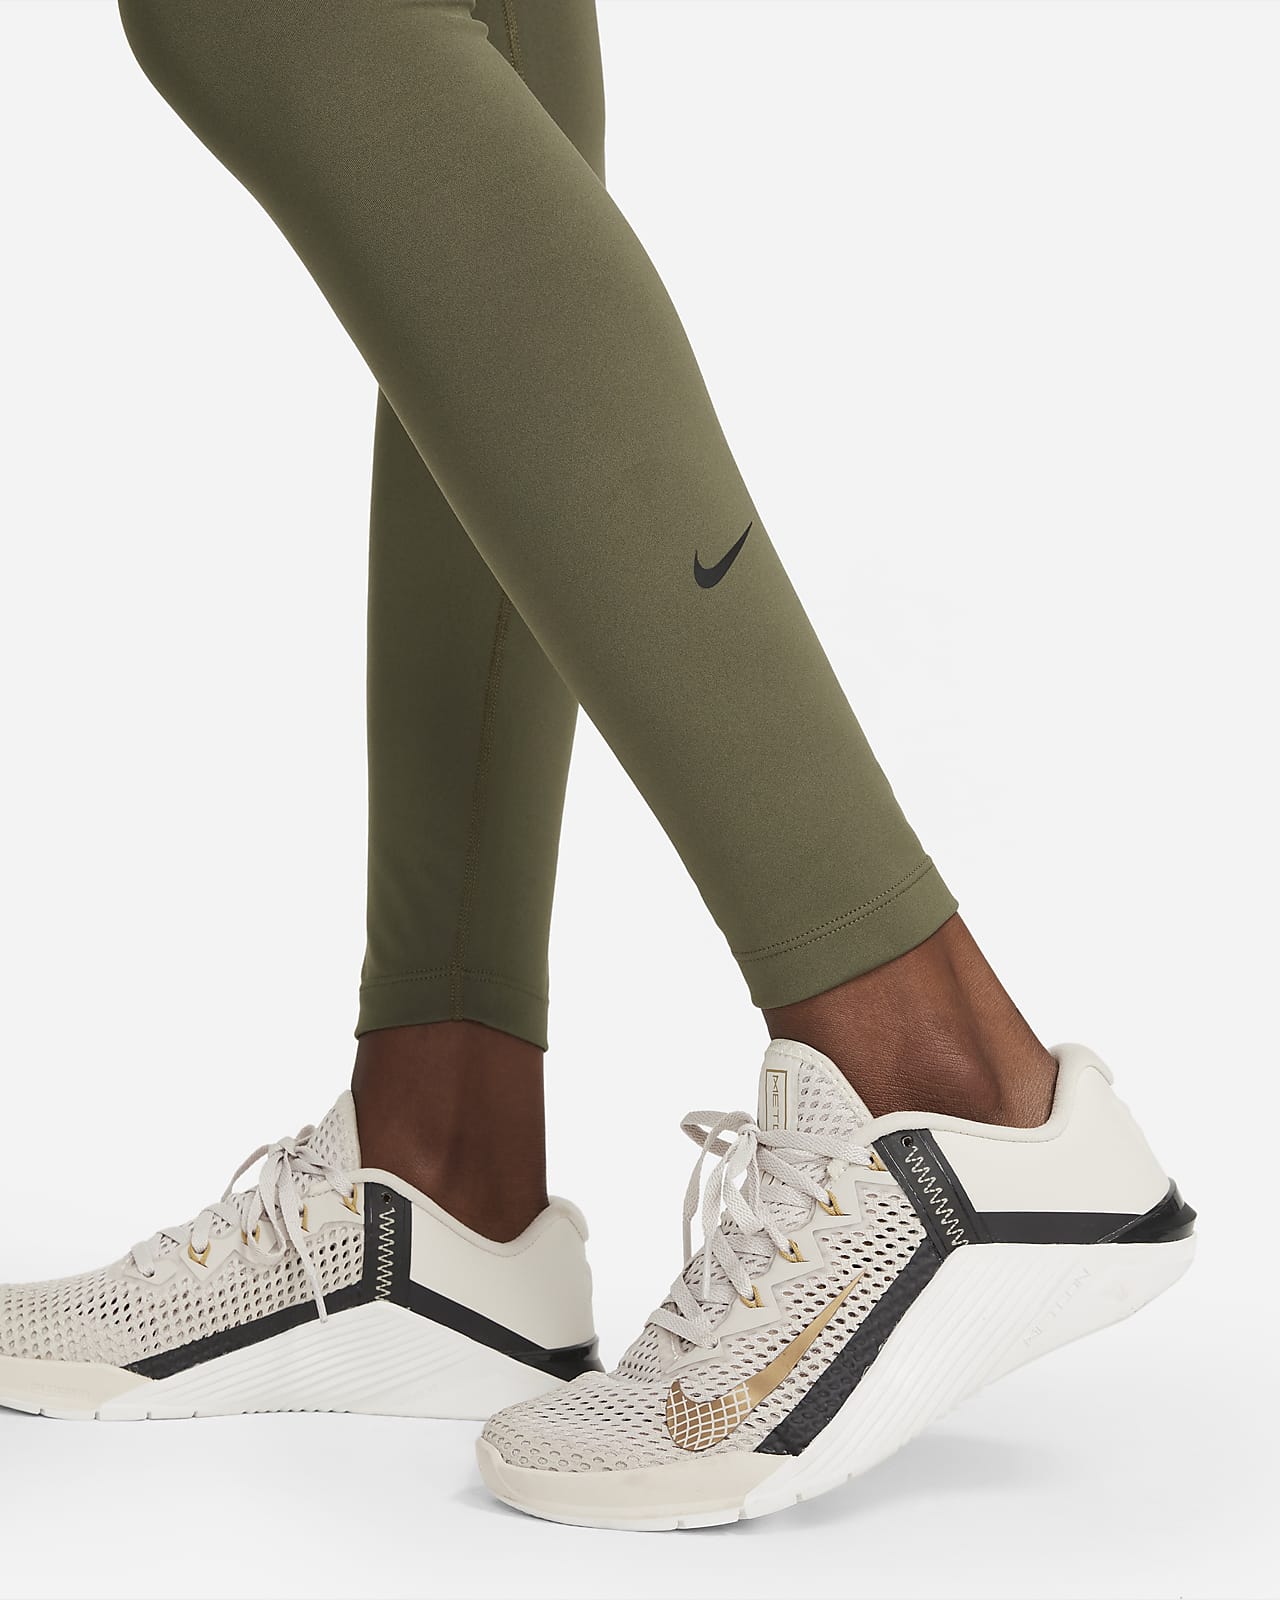 Nike One Training dri fit high rise cropped leggings in diffused blue | ASOS